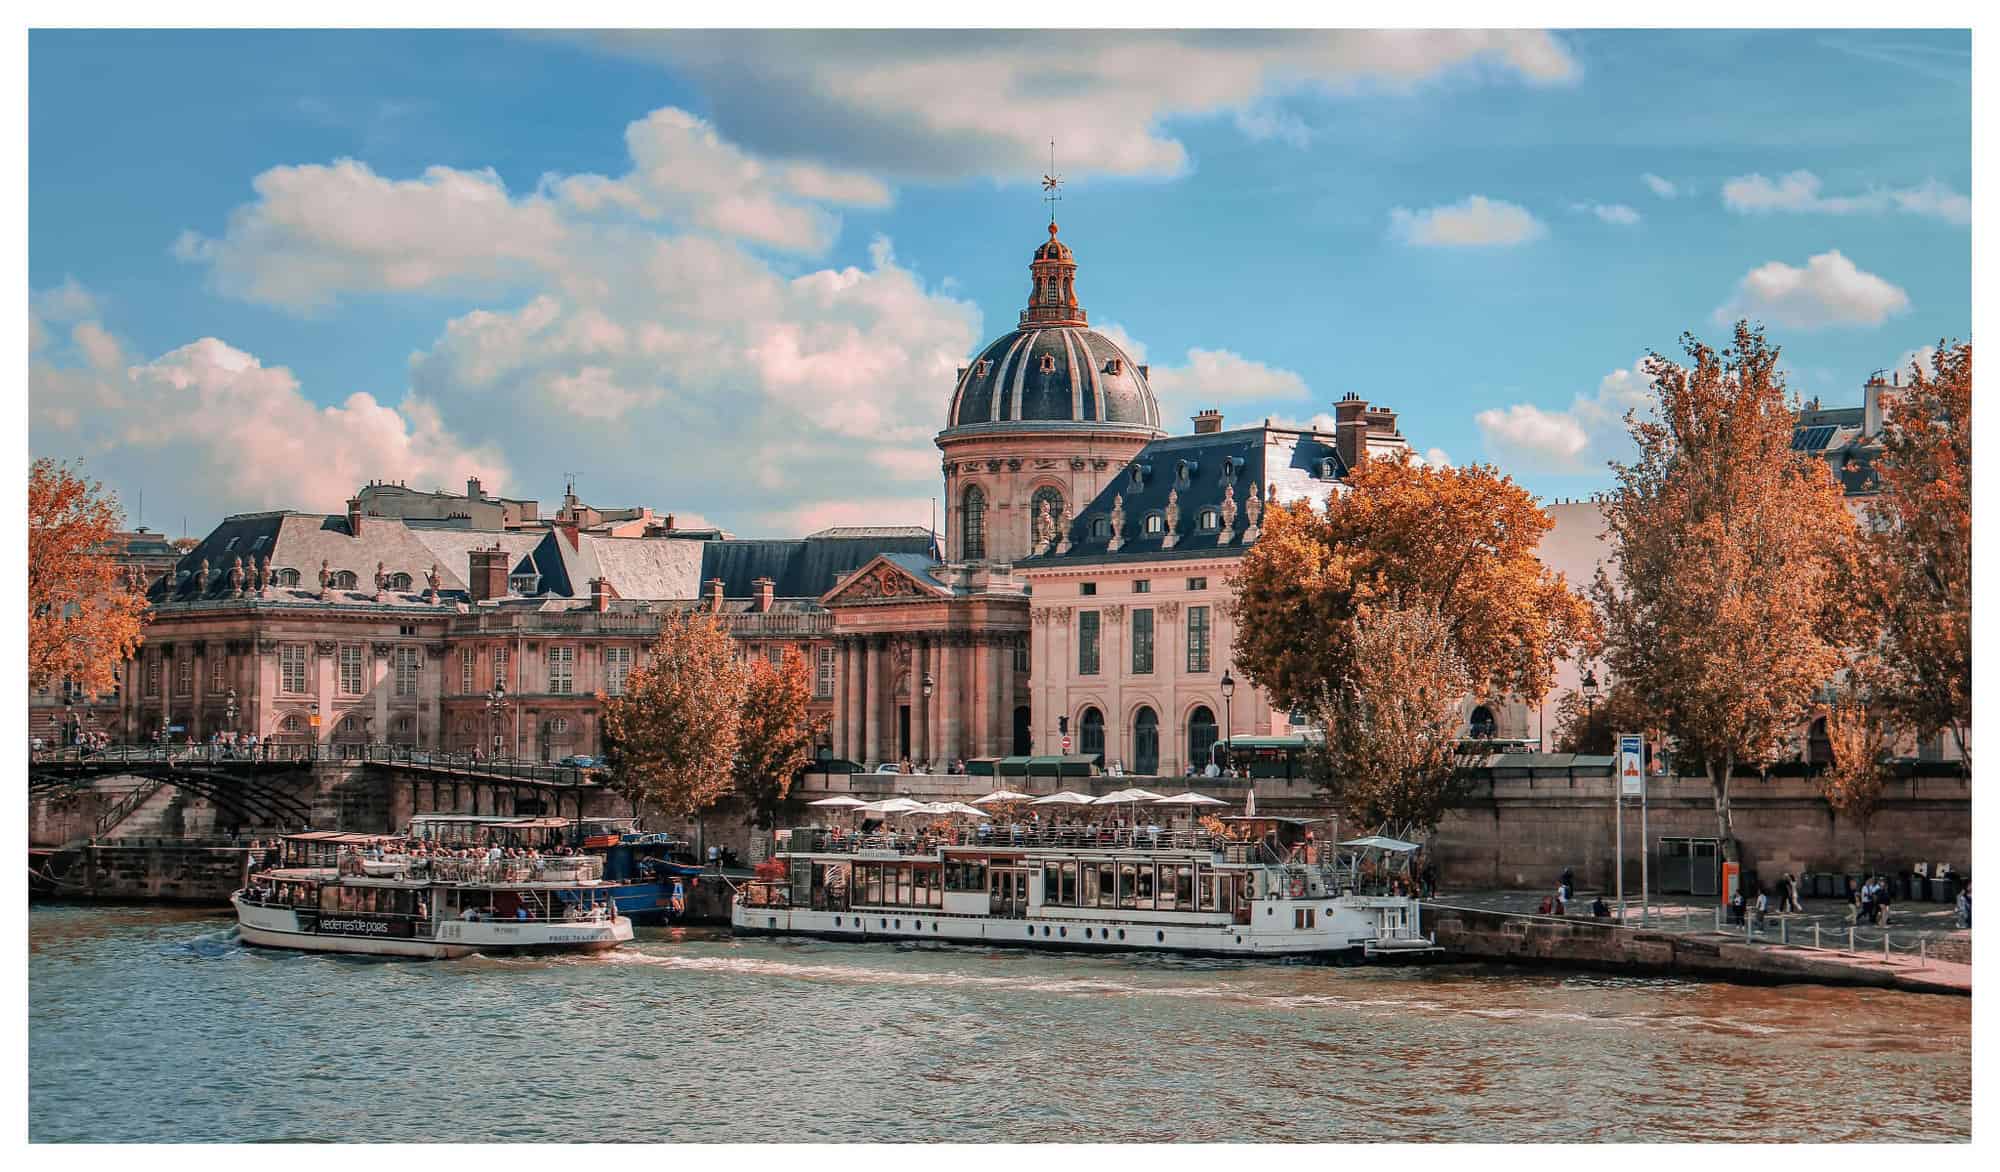 A view of the Seine river in the middle of an autumn day, with white boats, brown leaved trees, and rustic buildings.